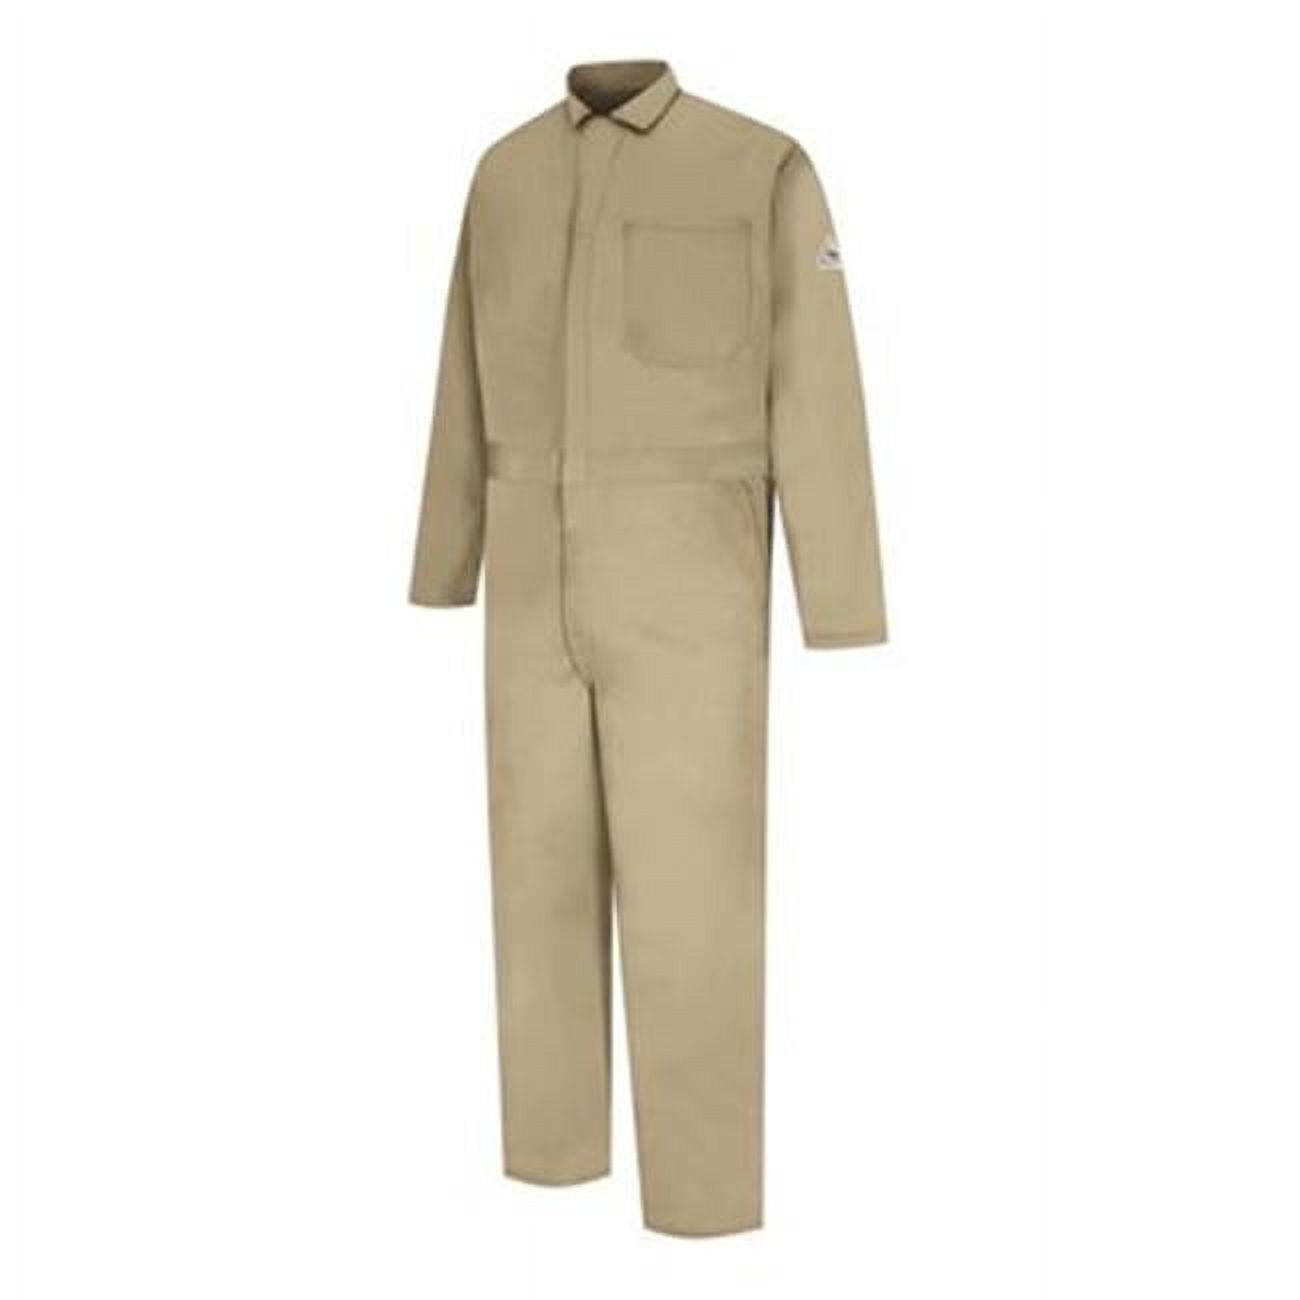 Bulwark 60'' Navy Cotton Flame Resistant Coverall With Zipper Closure - image 1 of 2